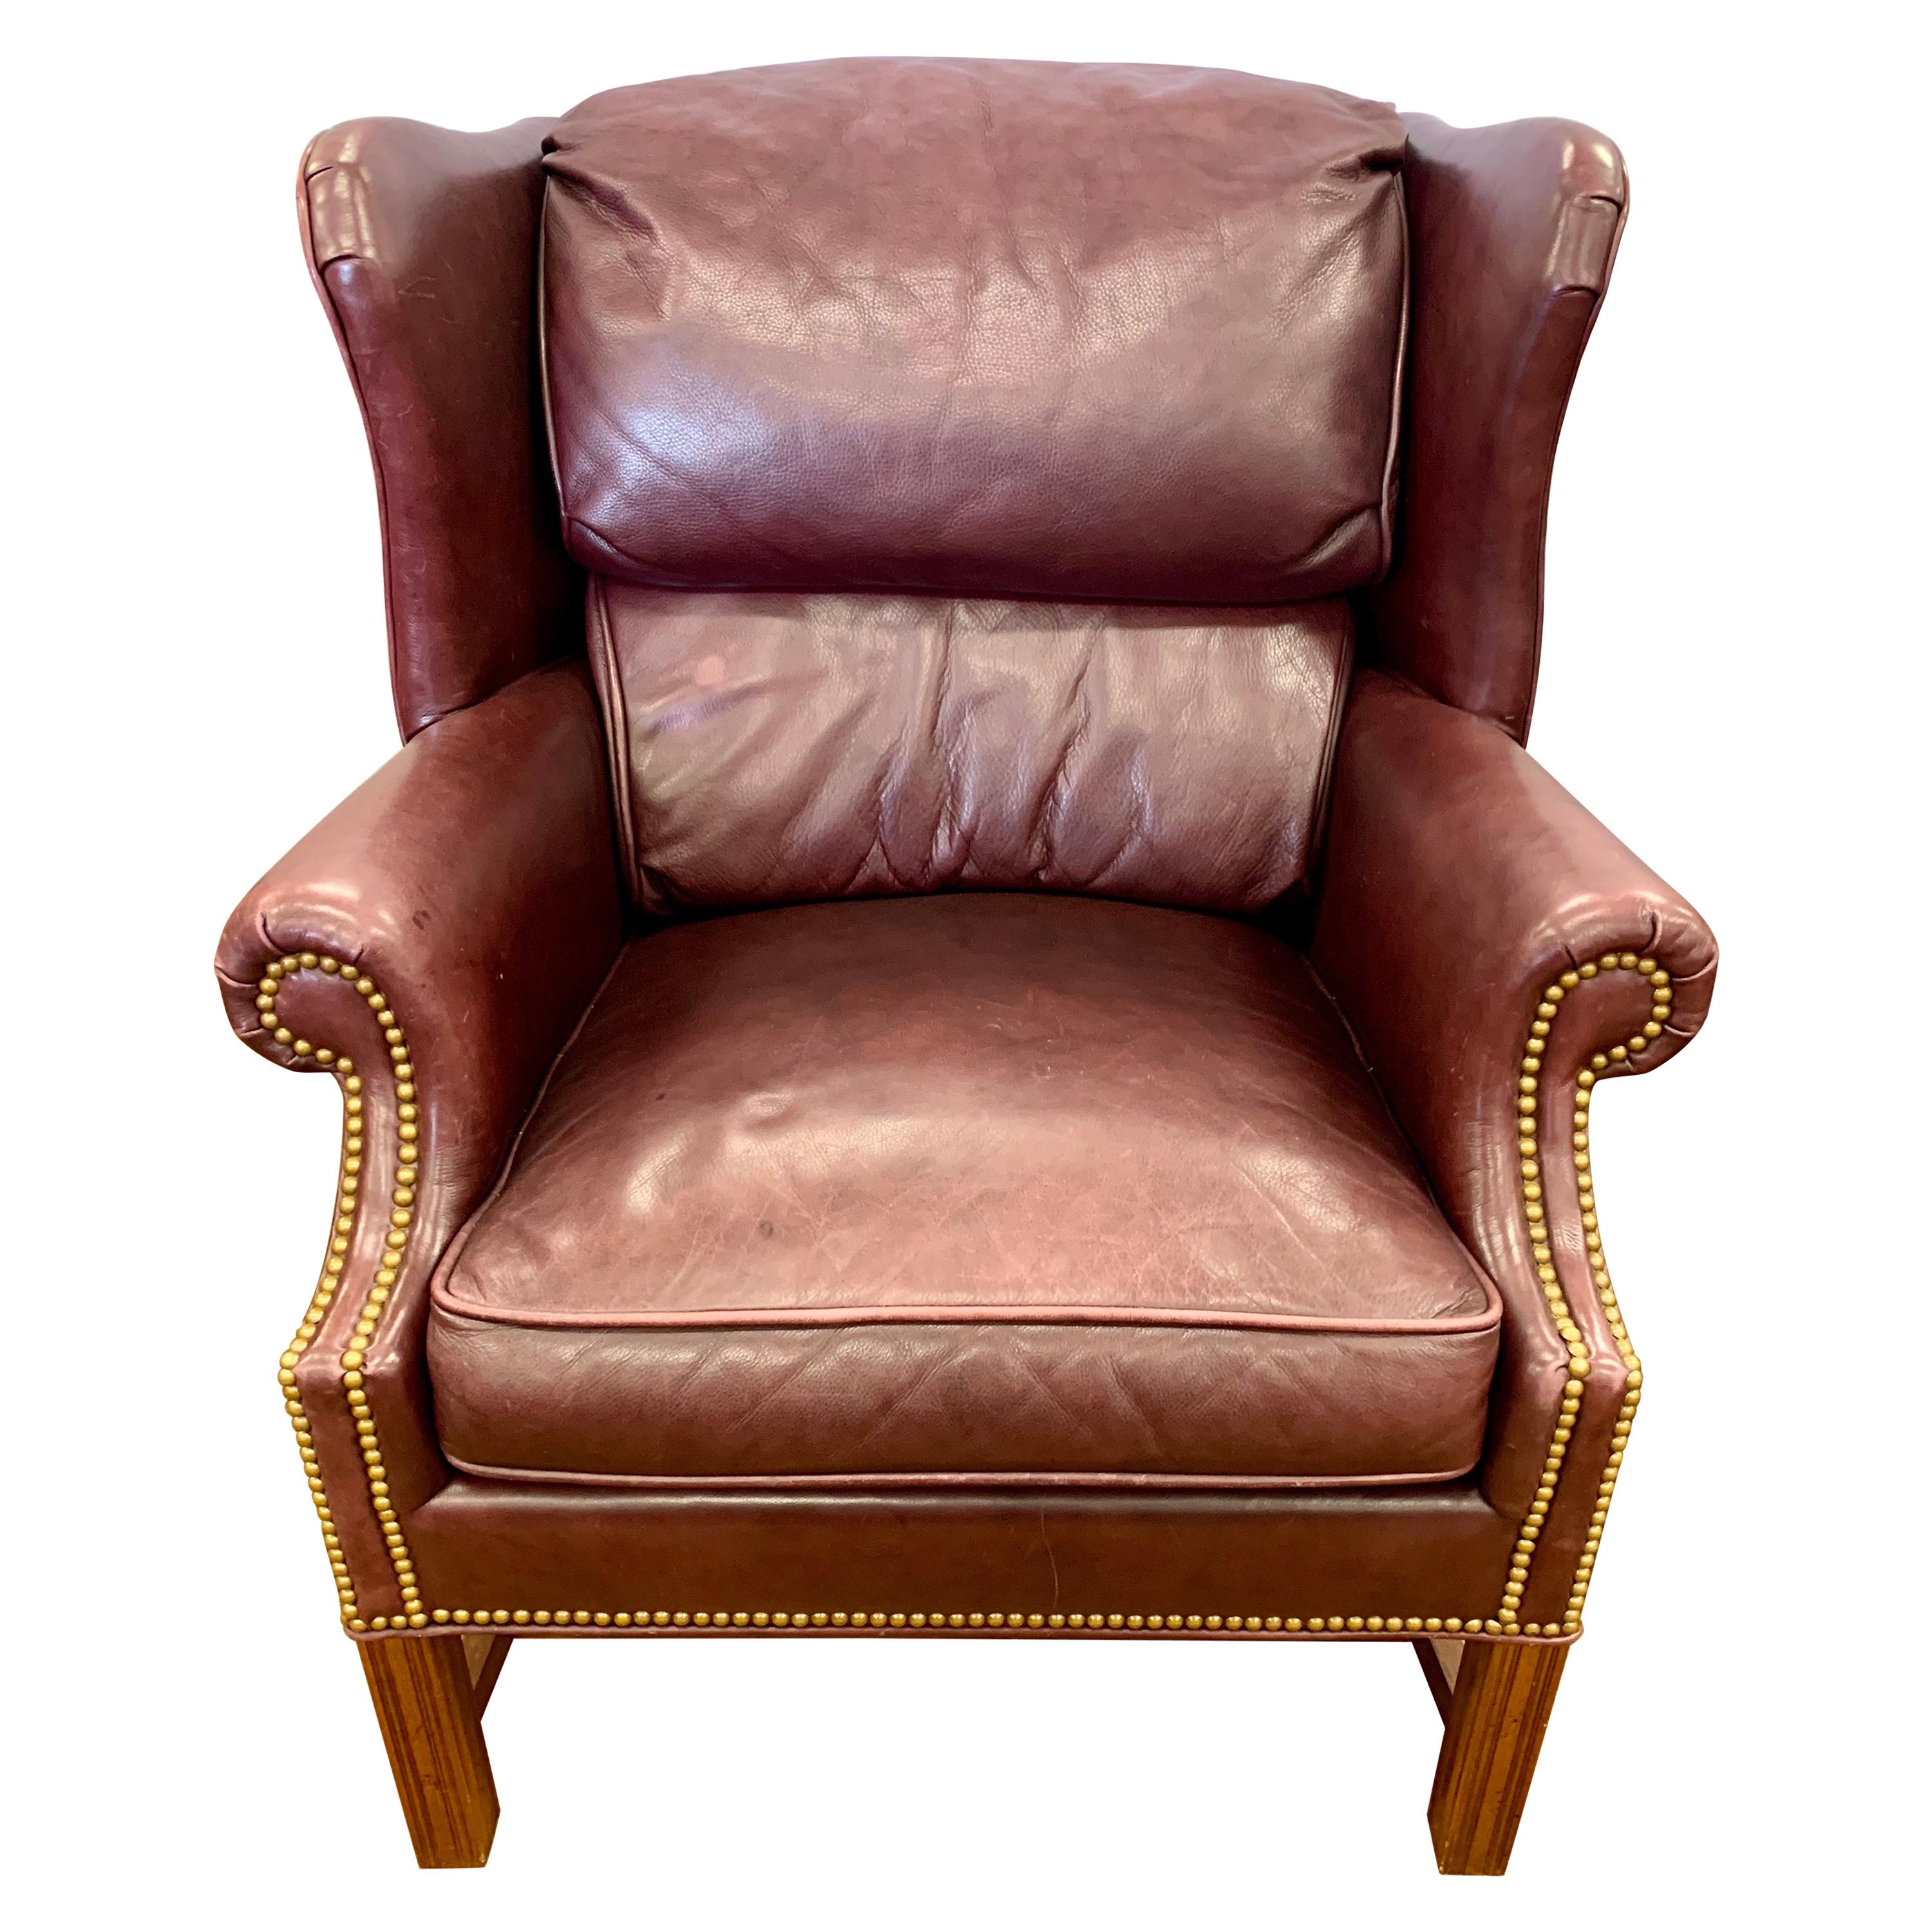 Bernhardt Leather with Nailheads George the III Wingback Reading Chair